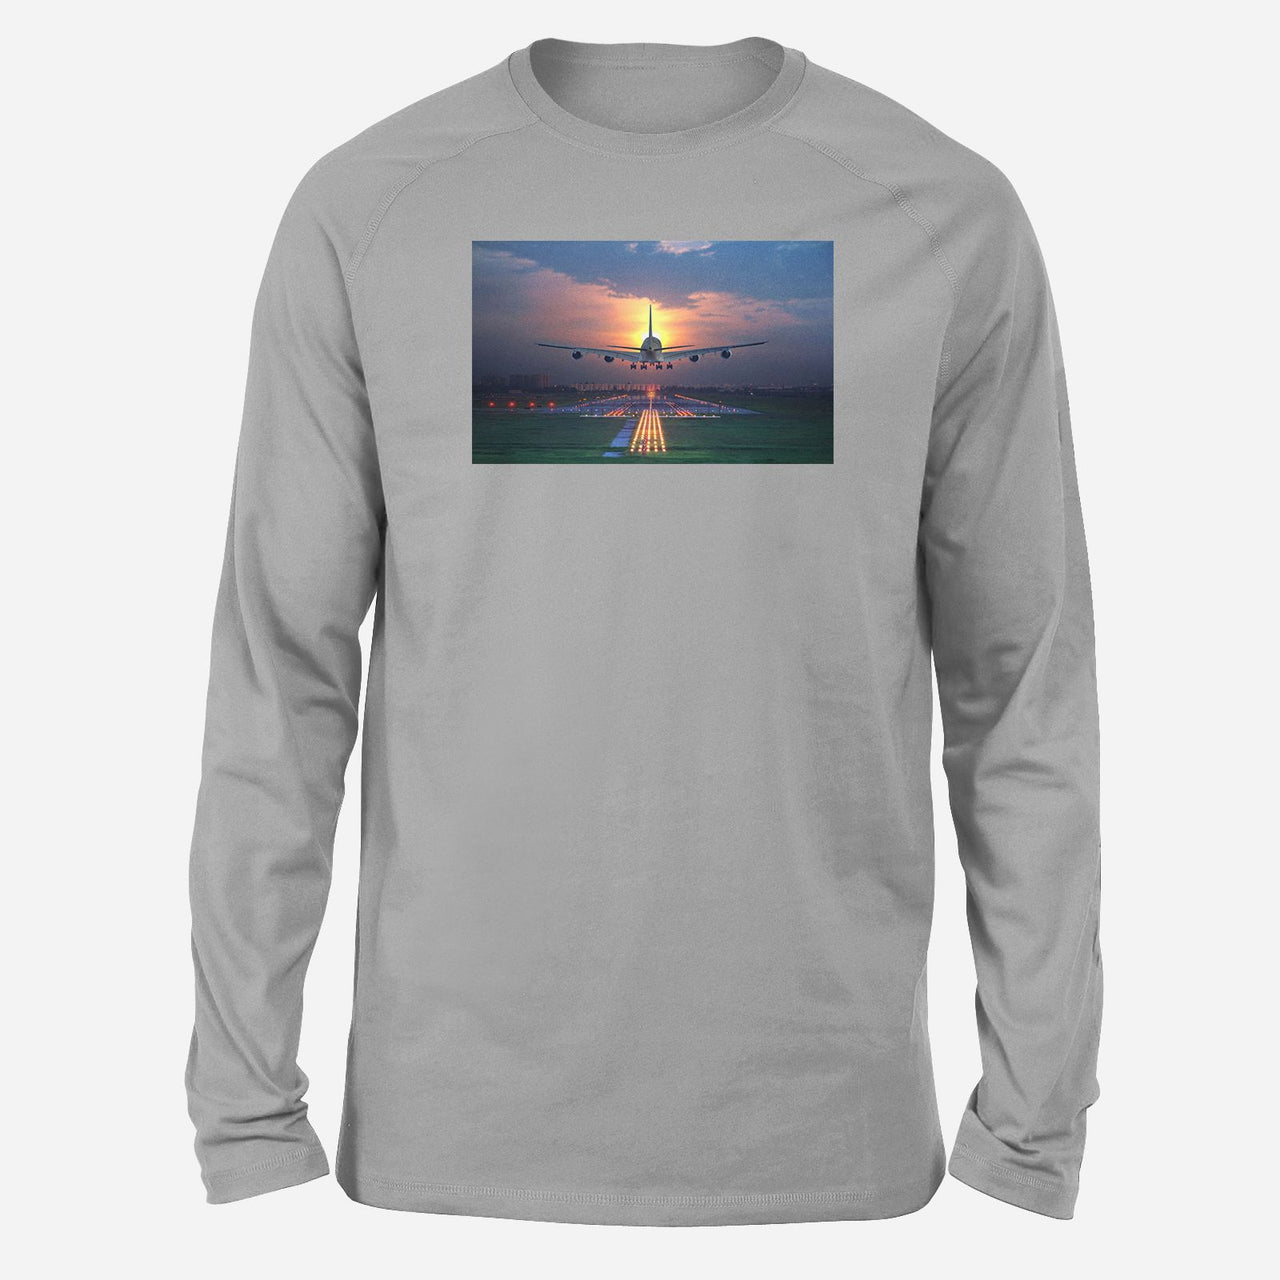 Super Airbus A380 Landing During Sunset Designed Long-Sleeve T-Shirts